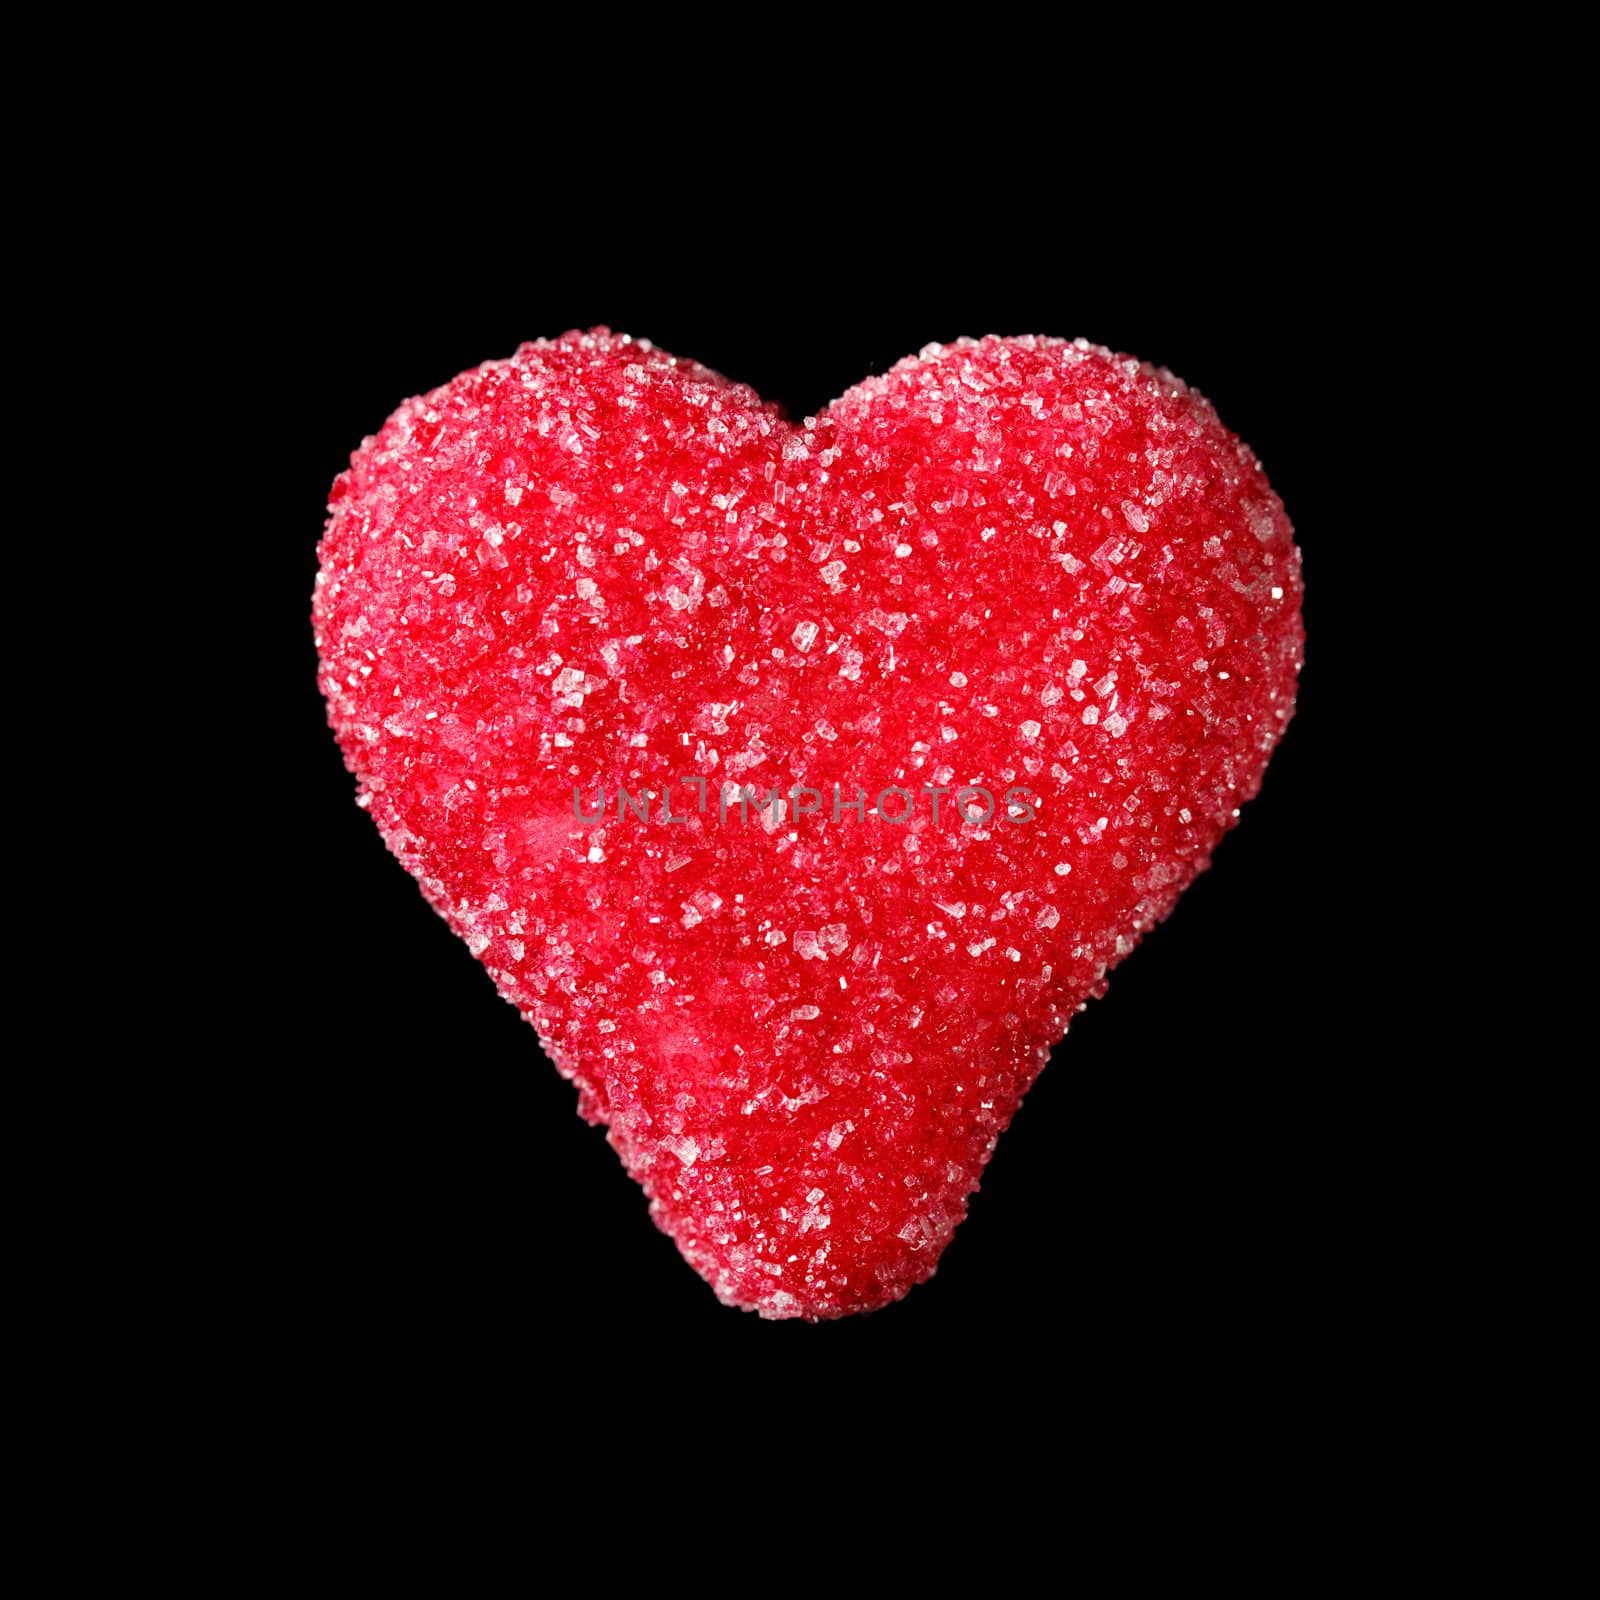 Red Marzipan heart  by shebeko